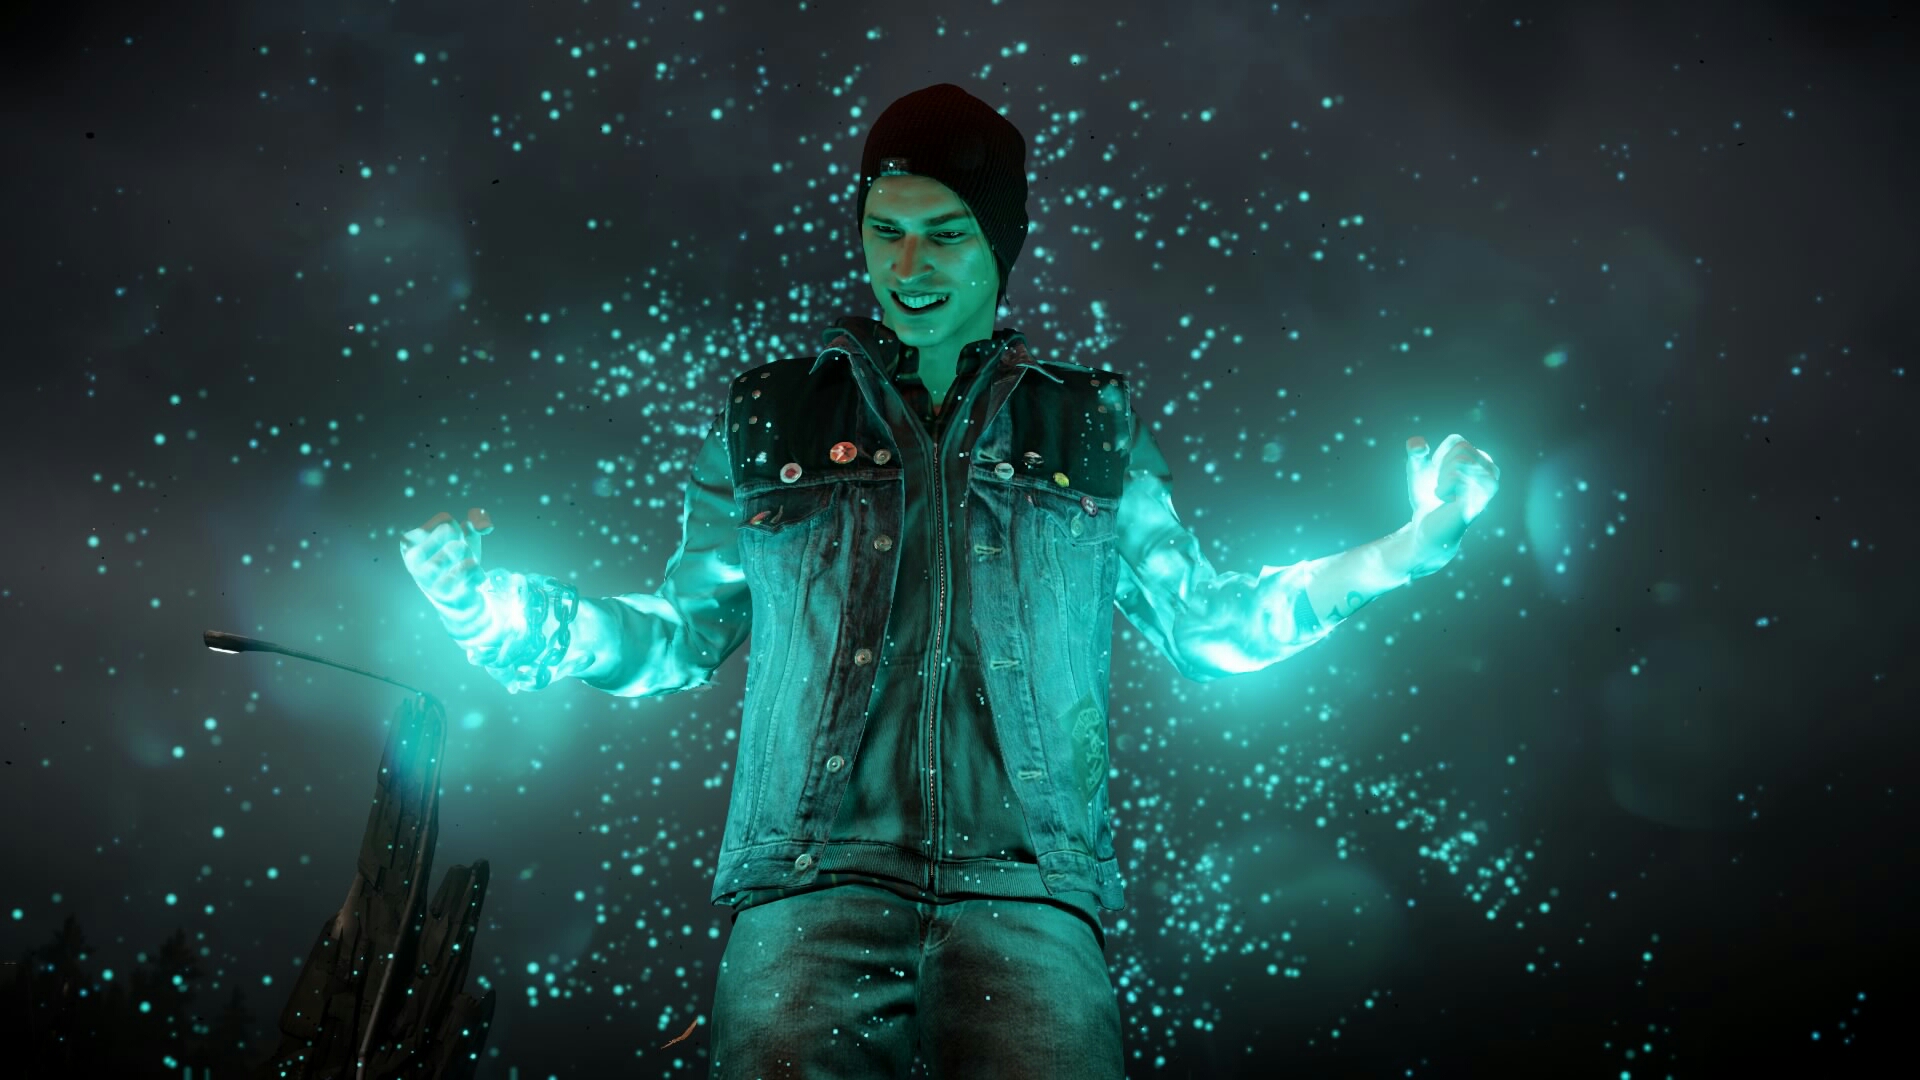 80+ inFAMOUS: Second Son HD Wallpapers and Backgrounds